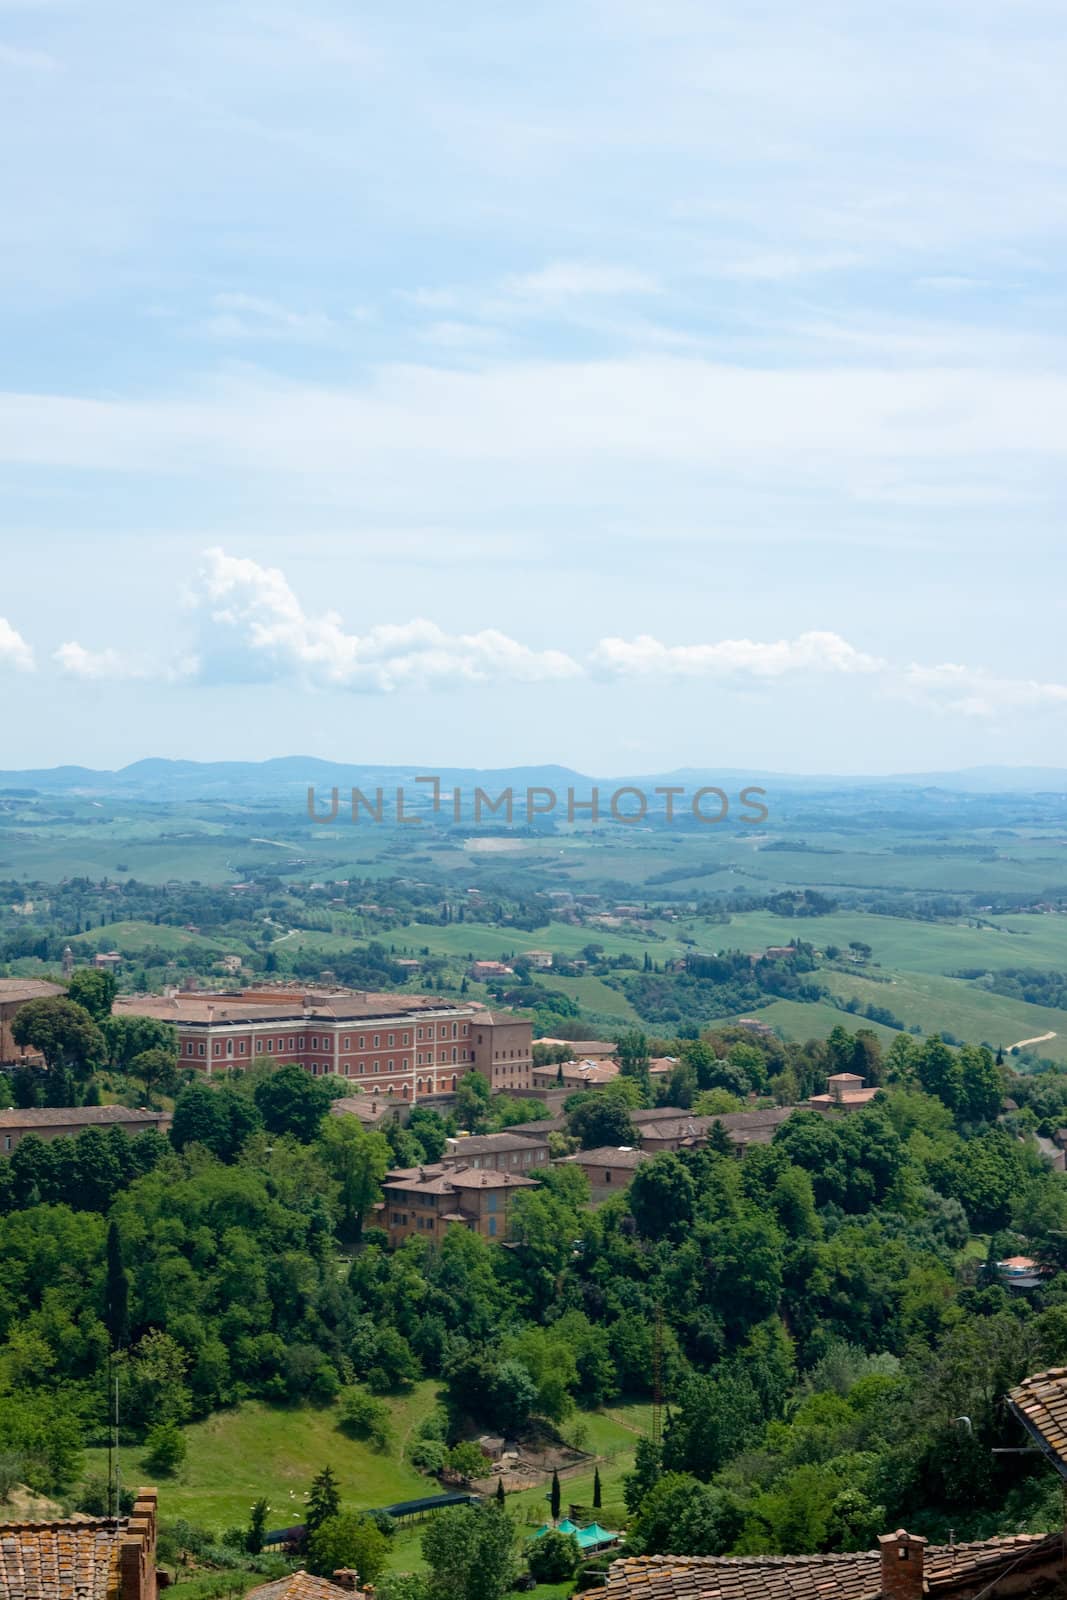 The view of Siena in summer day
